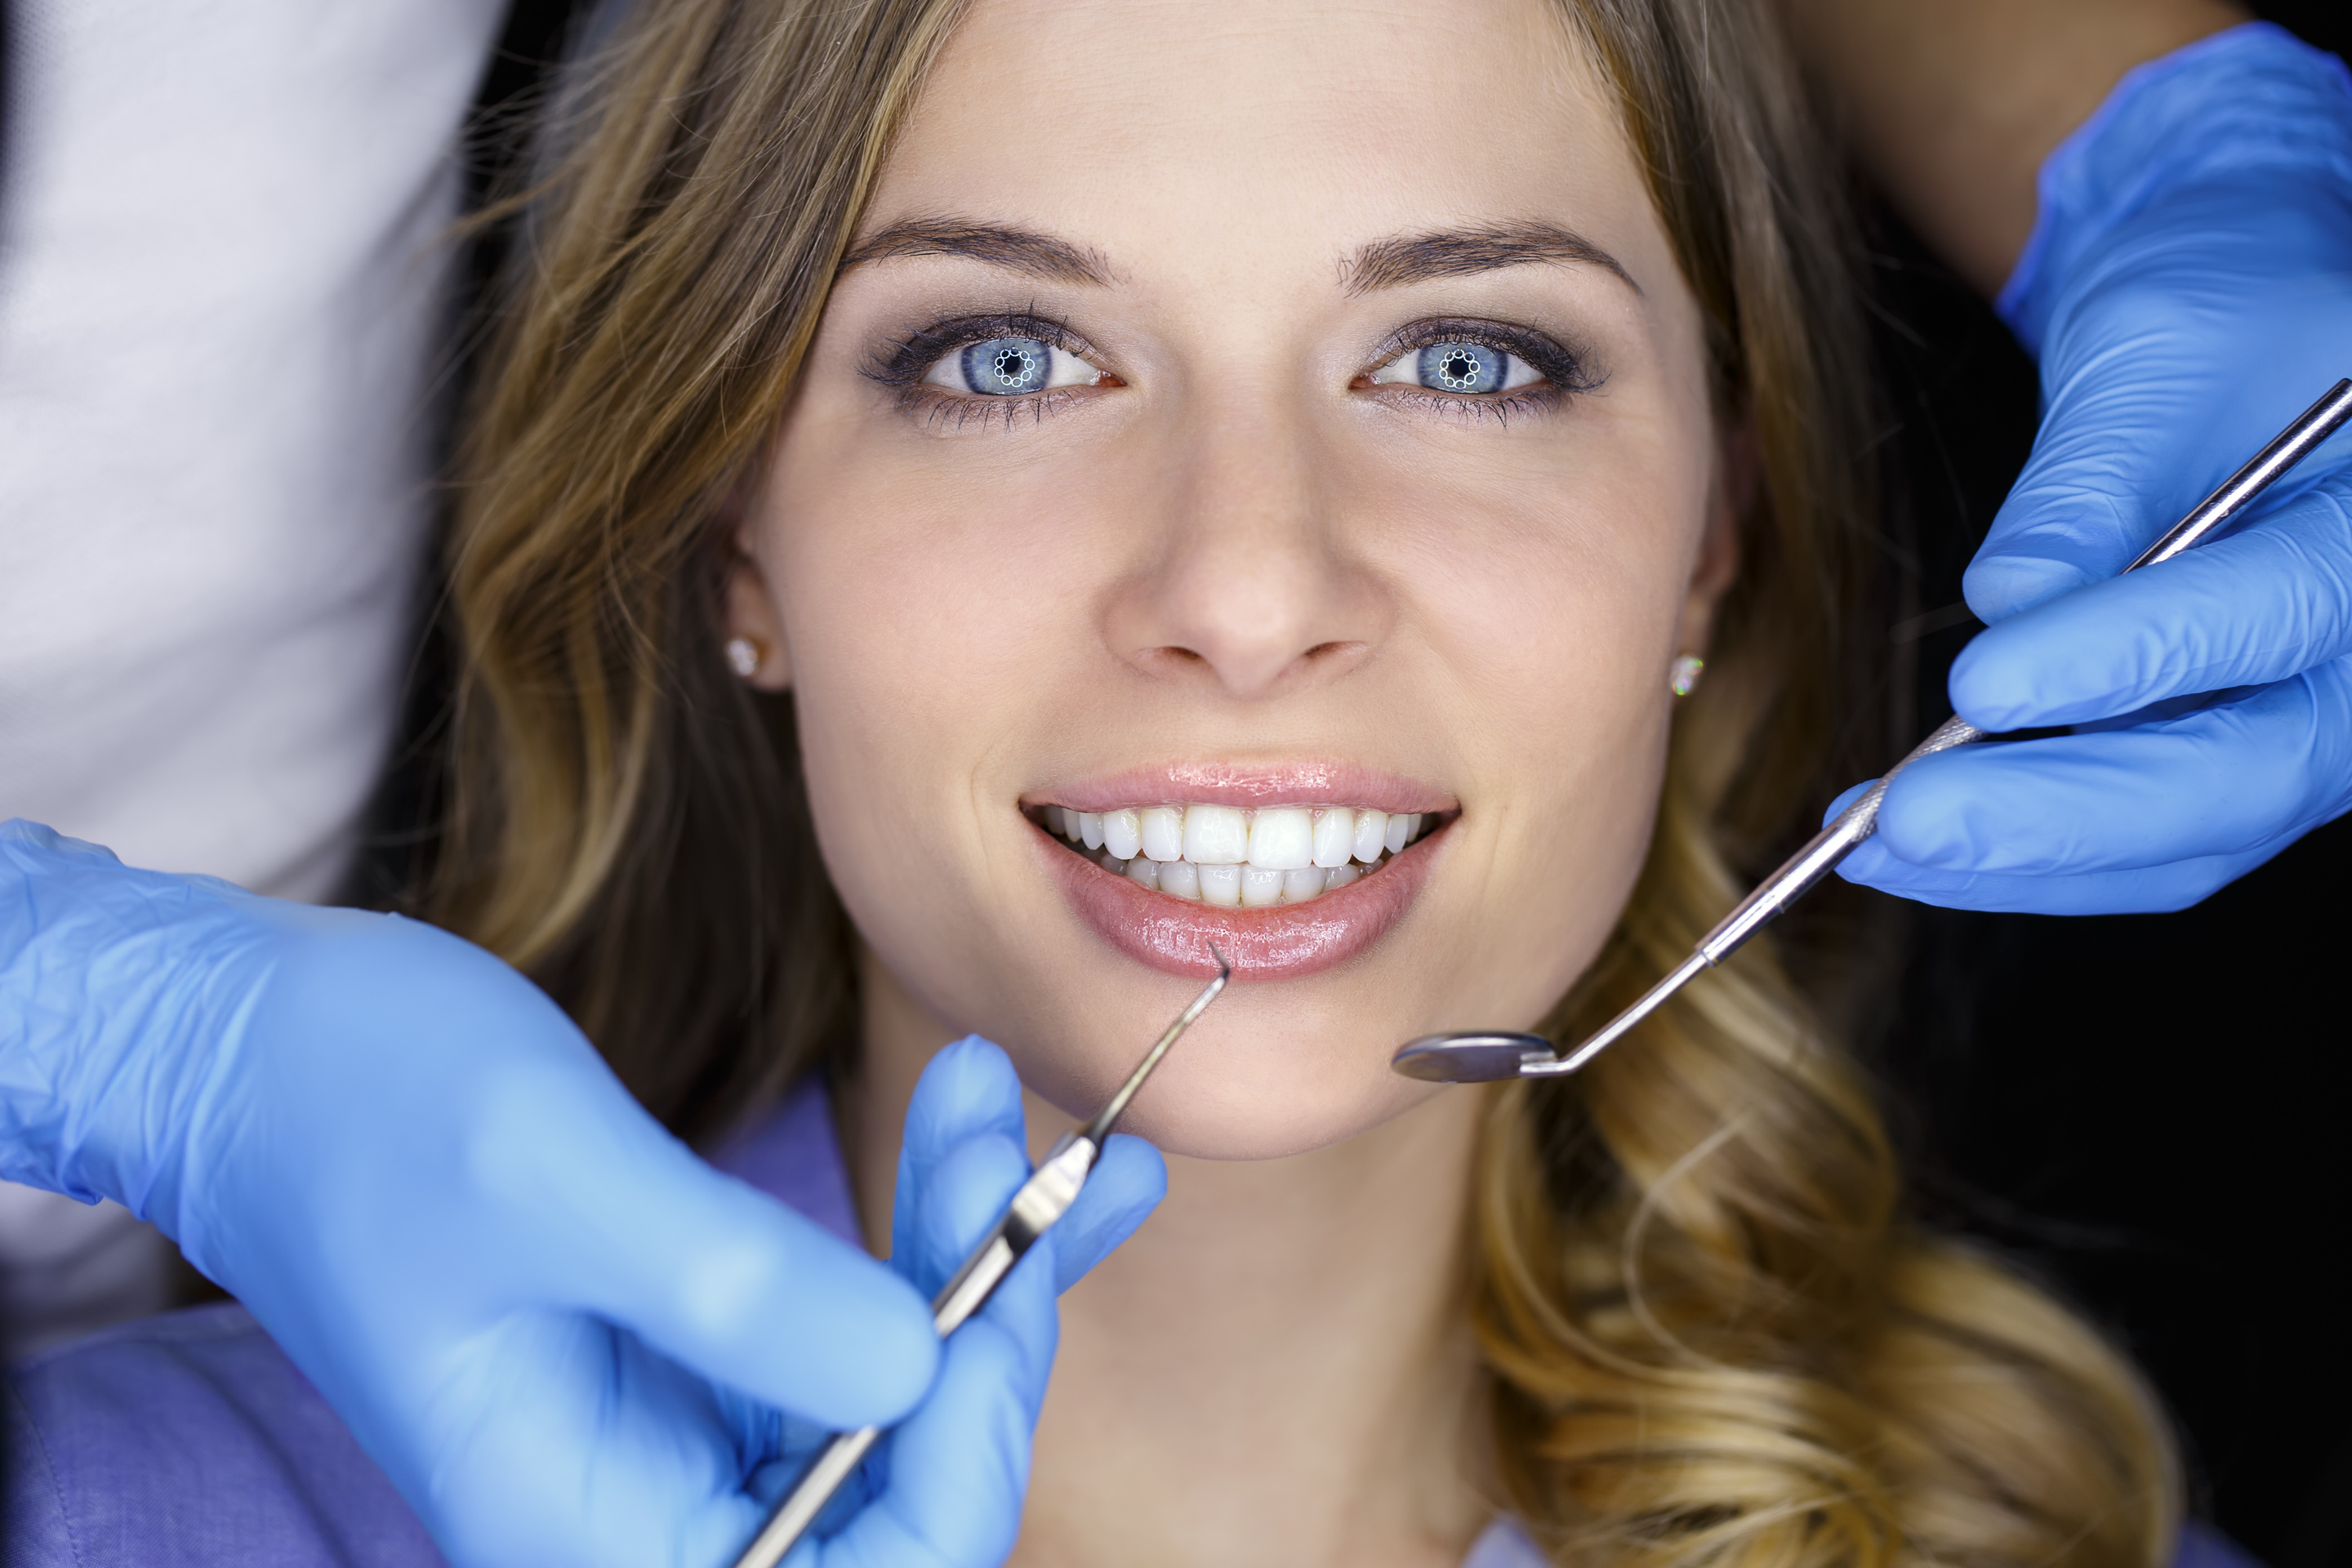 Where can I find teeth whitening in Stony Brook?